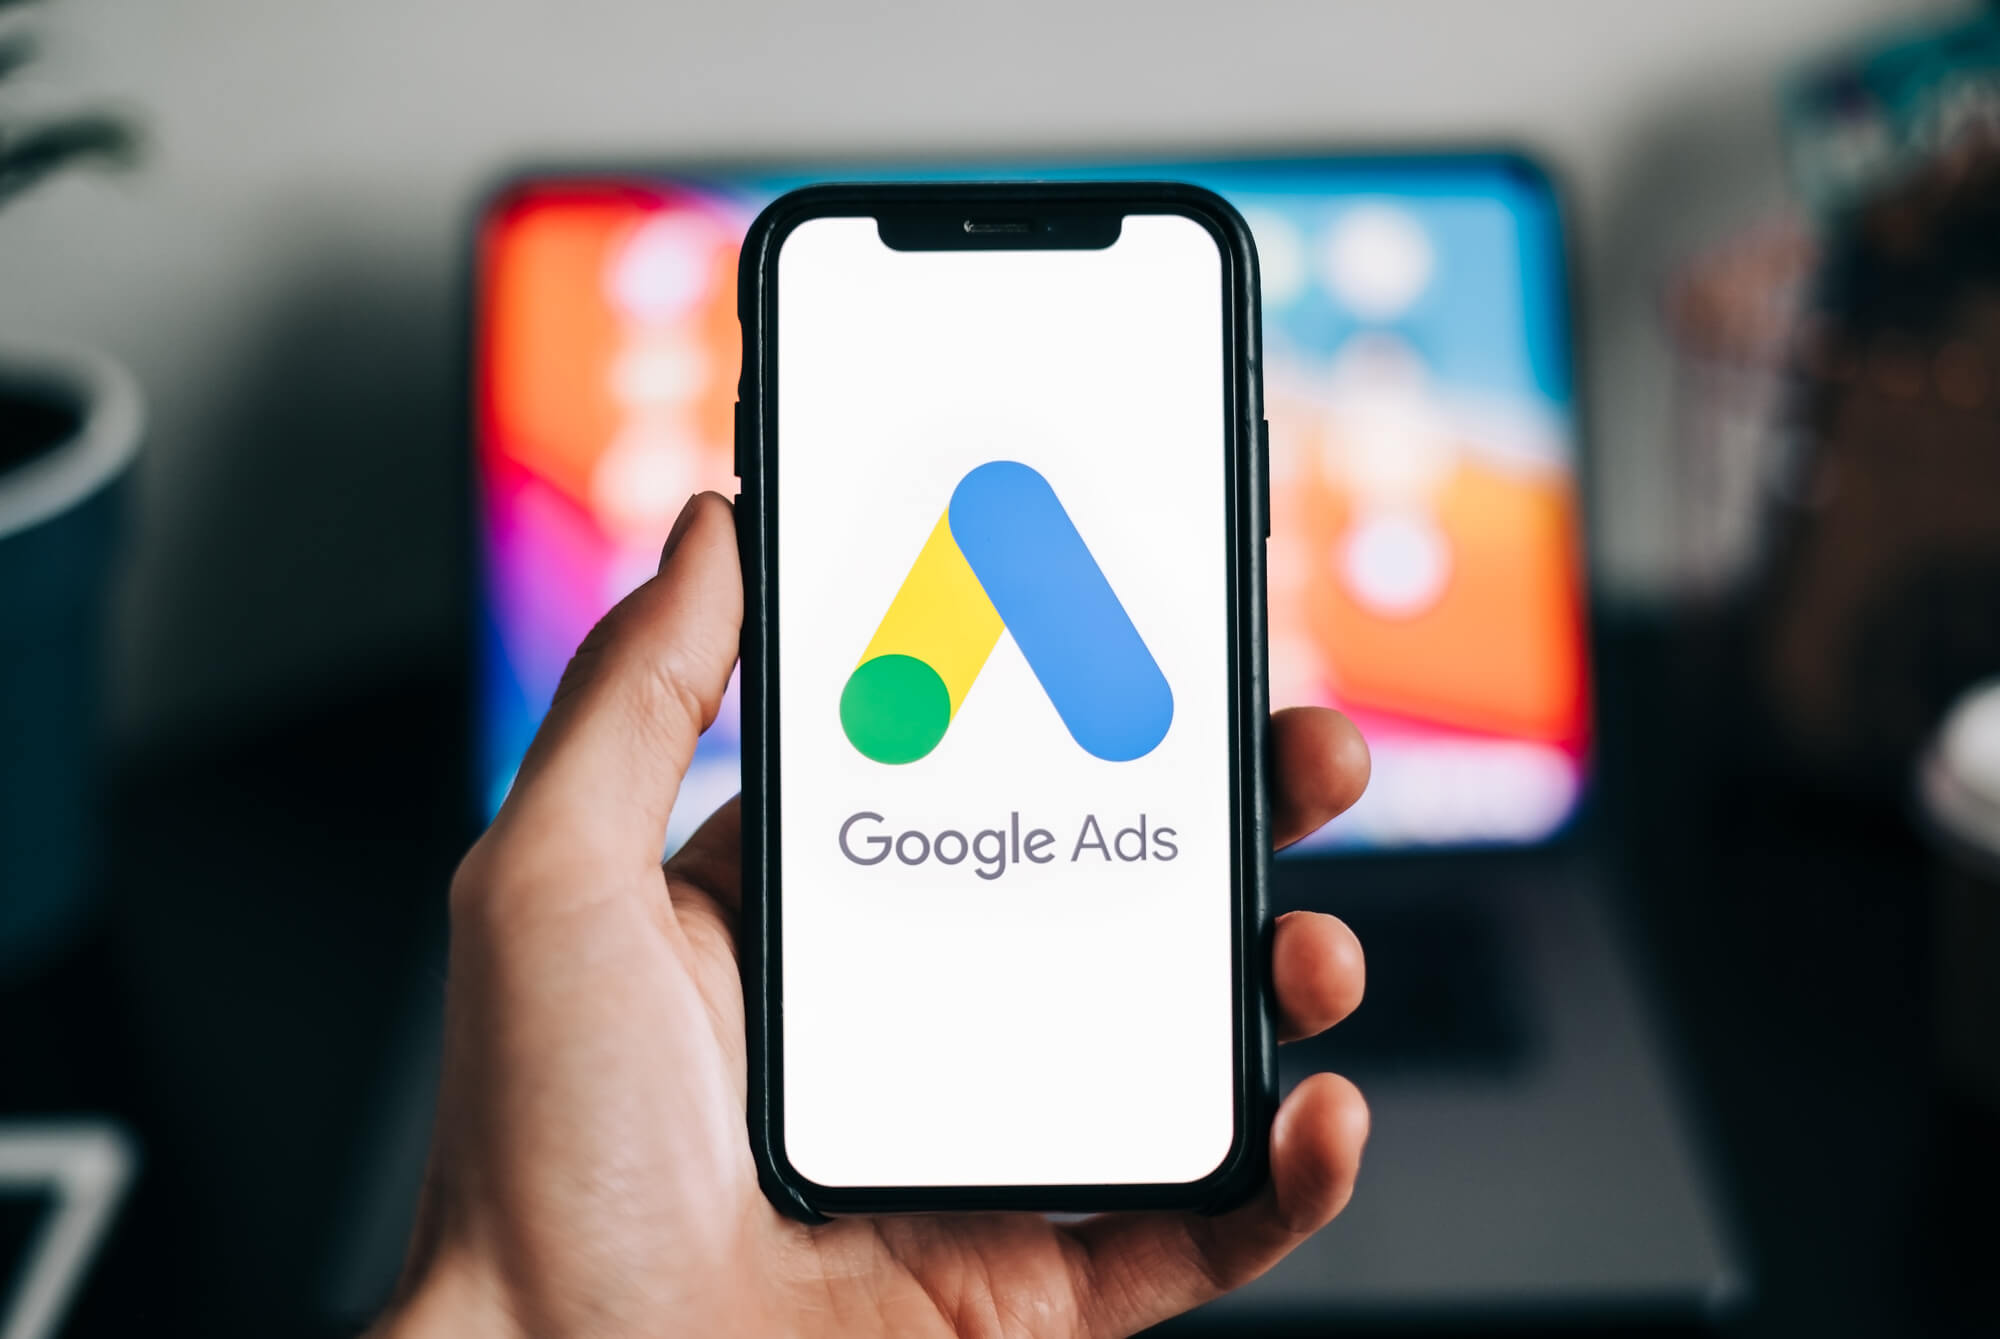 Google ads shown on phone in hand